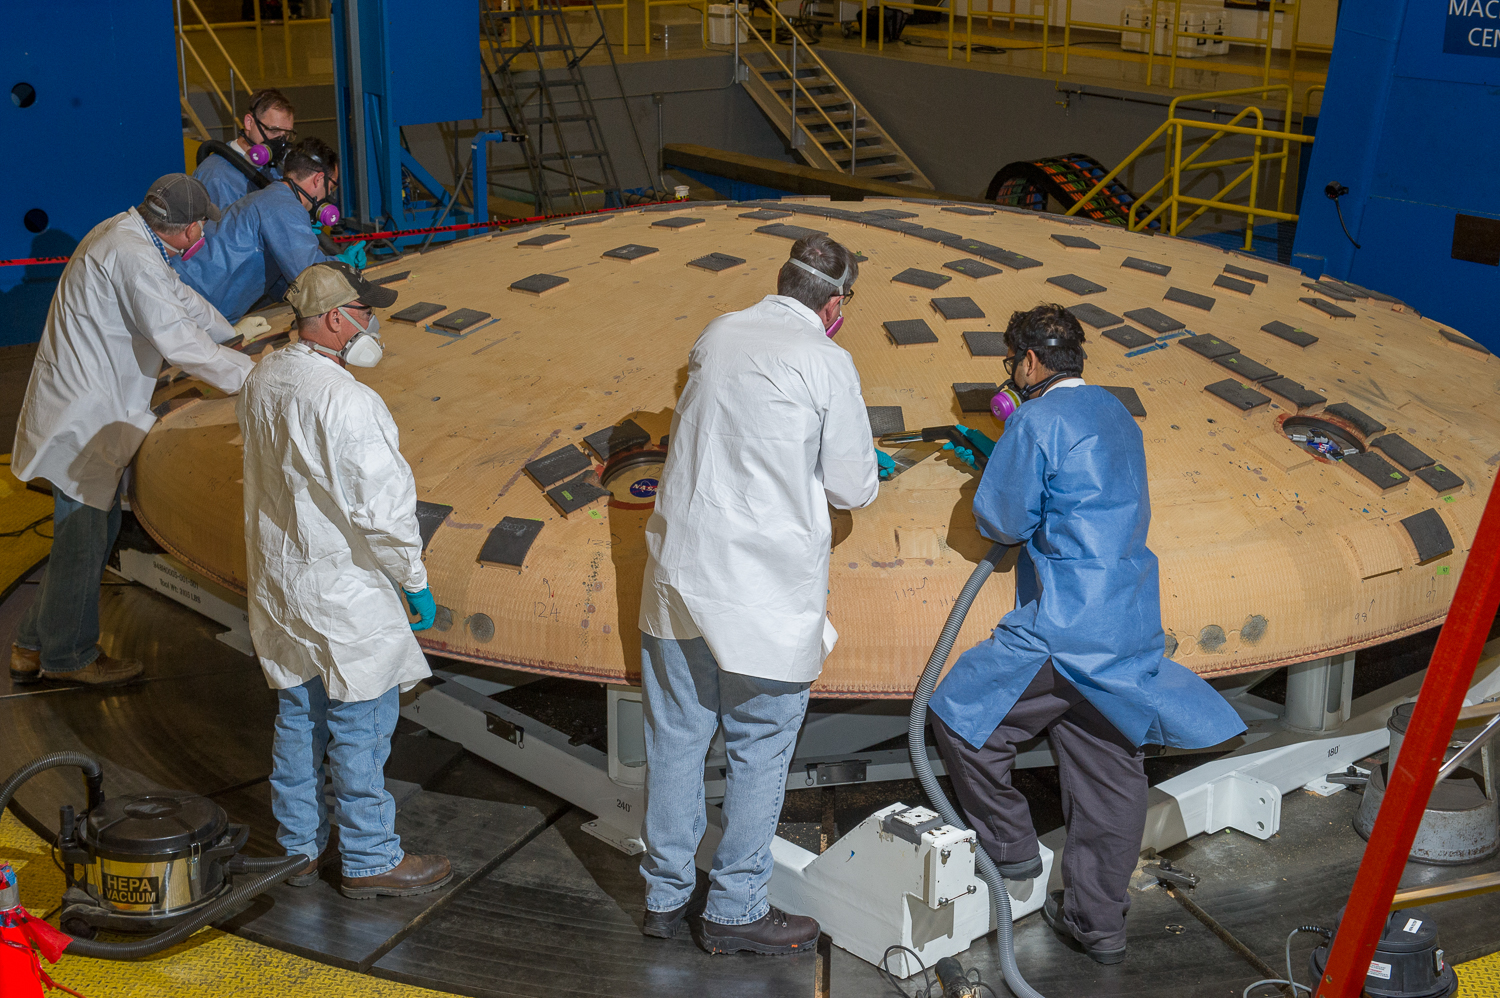 Engineers from NASA's Ames Research Center in Moffett Field, California, and NASA's Marshall Space Flight Center in Huntsville, Alabama, remove segments of a heat-resistant material called Avcoat from the surface of the Orion heat shield, the protective shell designed to help the next-generation crew module and its future occupants withstand the heat of atmospheric reentry. The work is being conducted in the seven-axis milling machine facility at Marshall. Photo Credits: NASA/MSFC/Emmett Given